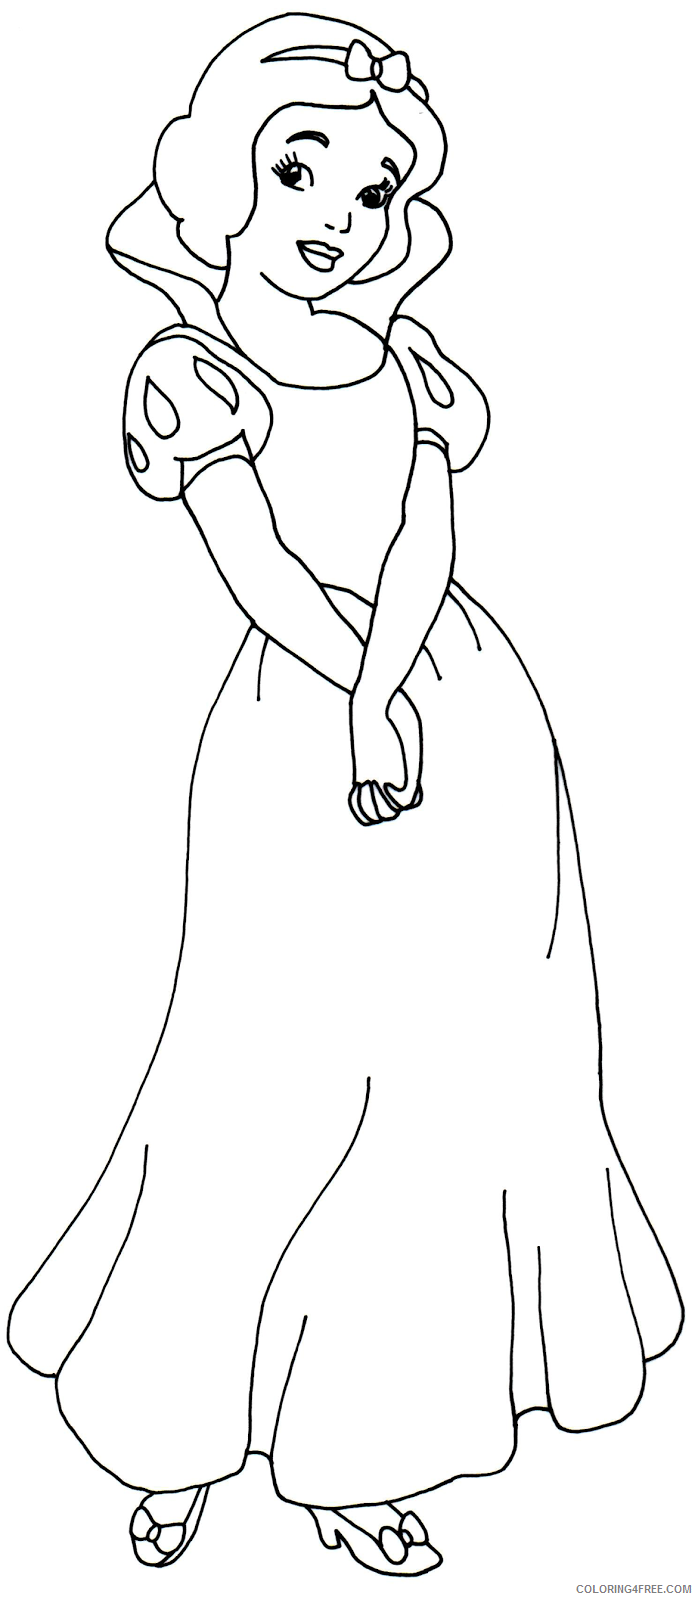 snow white coloring pages for kids Coloring4free